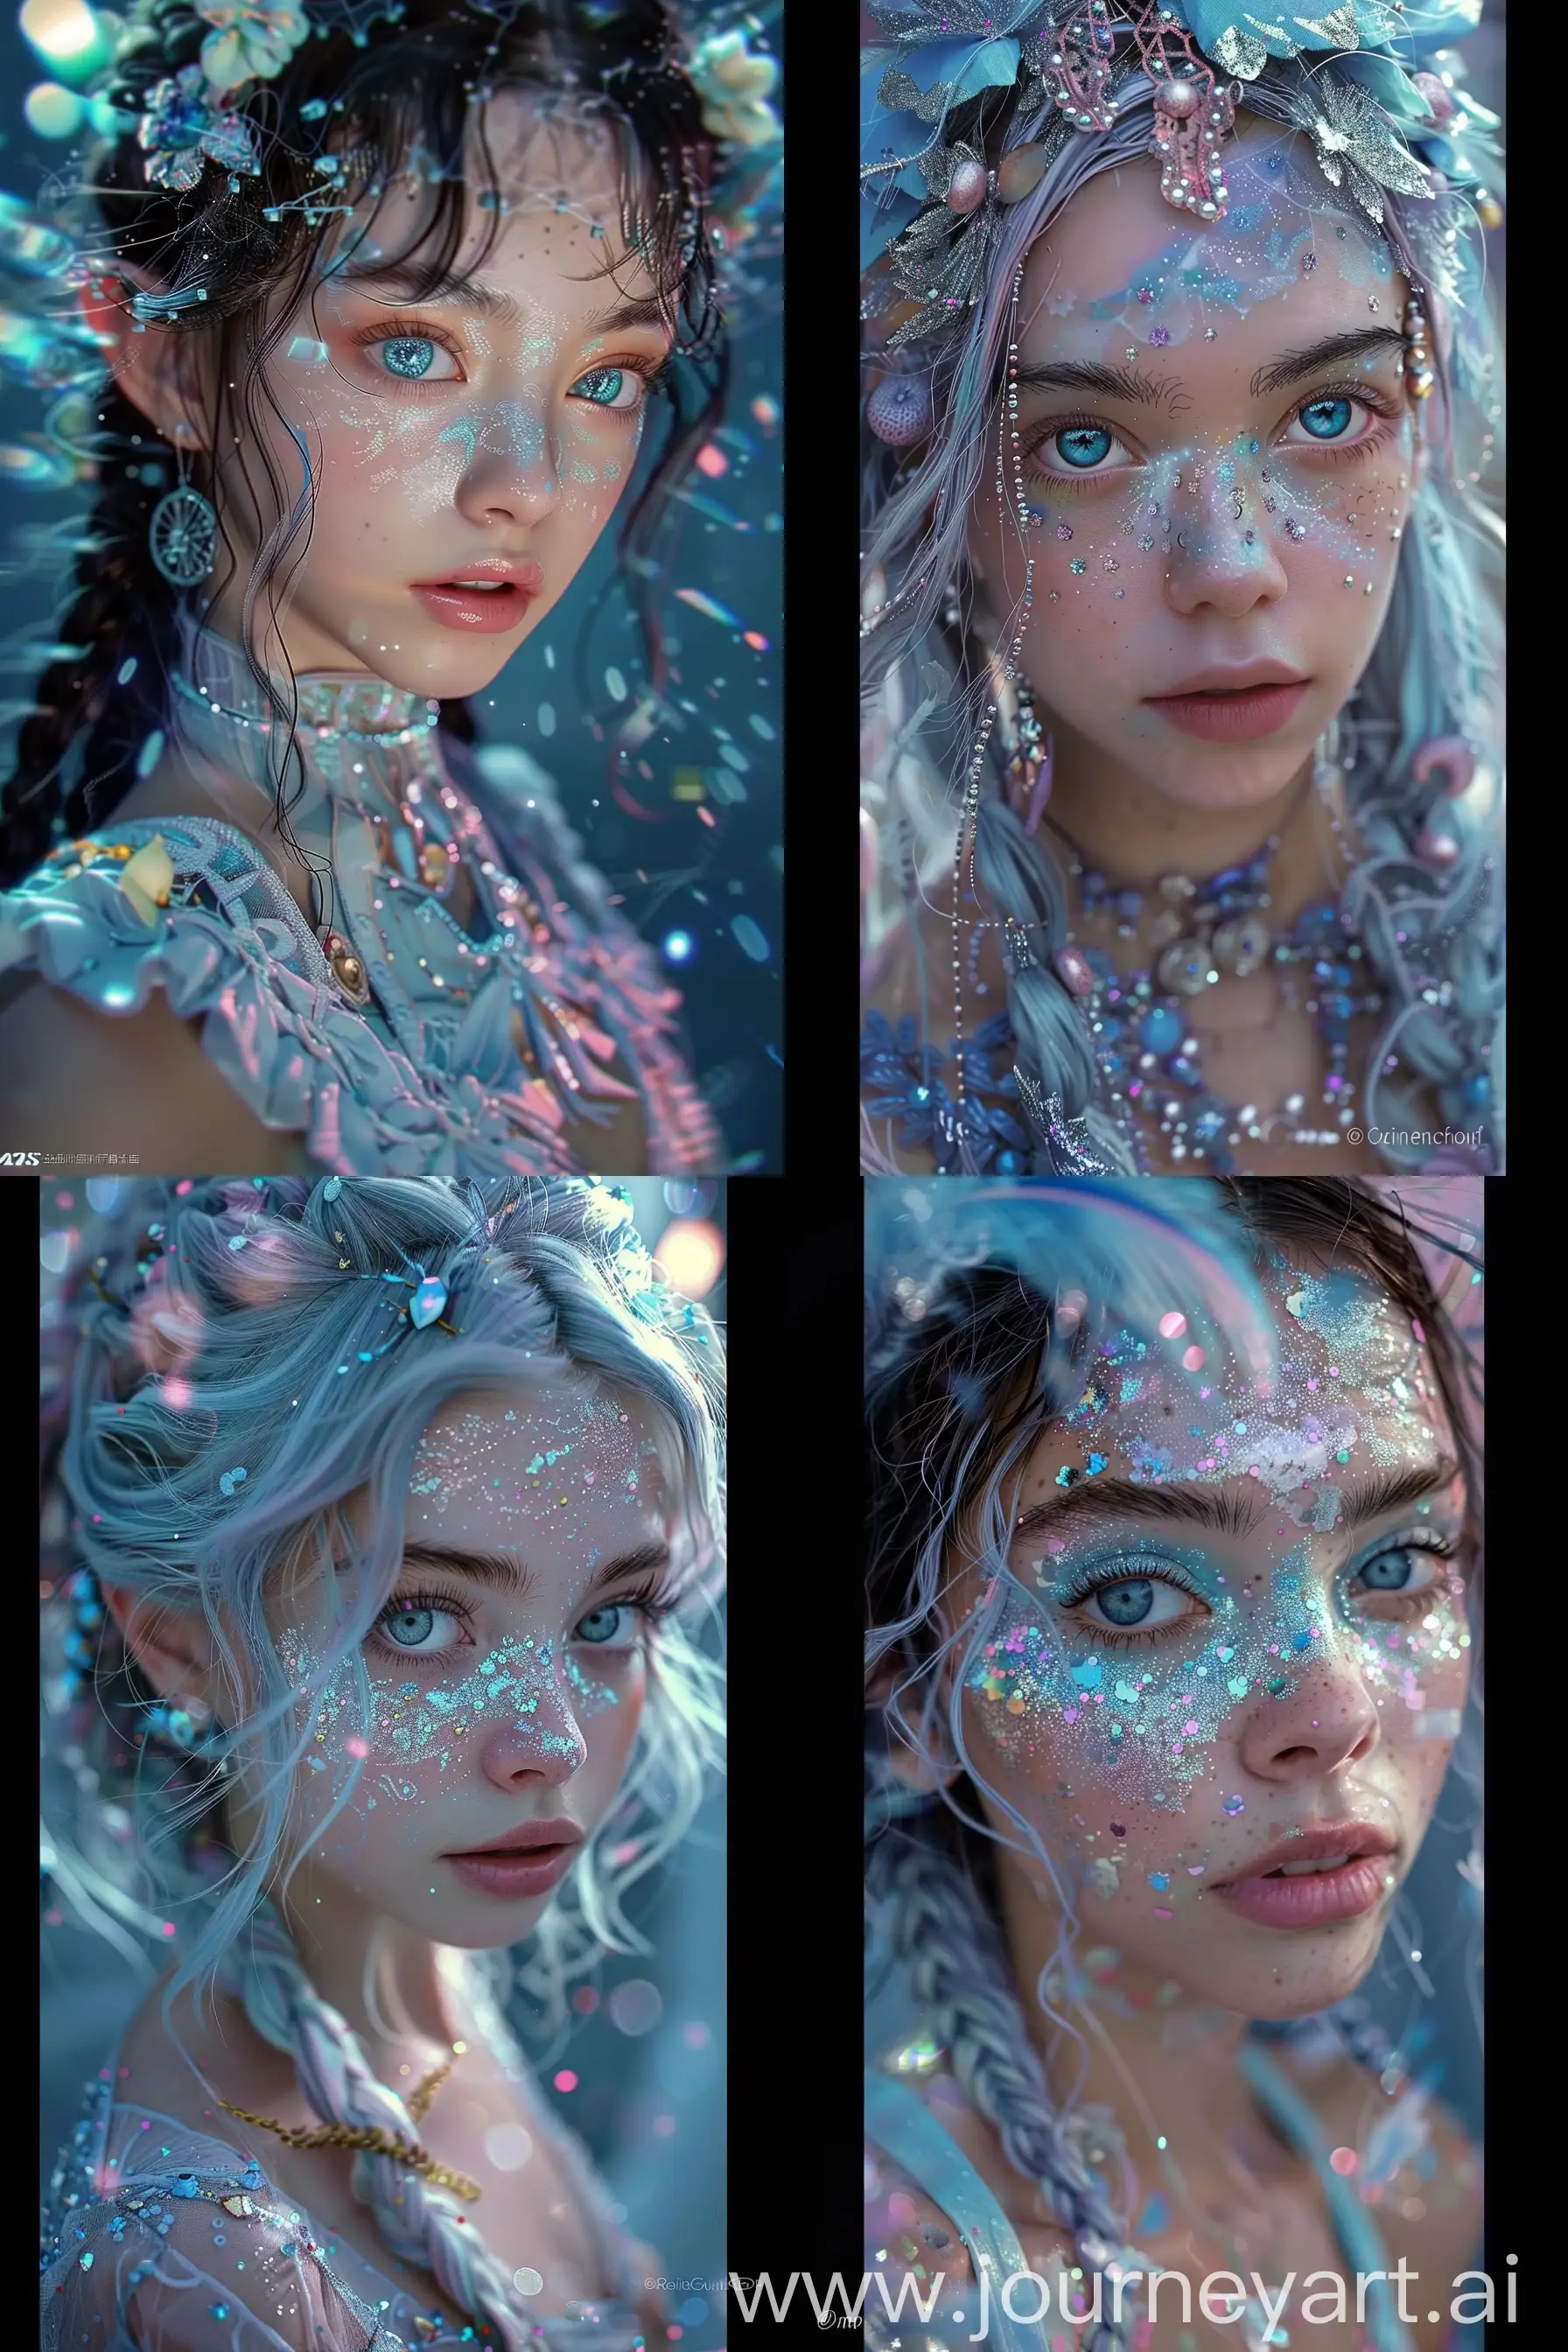 !mj2 https://i.postimg.cc/6Q20ZJVV/450c0651d96d2945ae24bb55eeafa116-0.jpg Elfin cyber-fantasy portrait, young woman with luminescent large eyes, ethereal makeup, holographic hair with braids, curls in shades of blue, pink, lavender, adorned with futuristic accessories, sci-fi armor attire with metallic sheen, embedded gemstones, intricate patterns, abstract celestial background with technological motifs, mood of enchantment, intrigue, cool color palette with blues, purples, silver, accents of pink, pastel warmth, @starsmits90, surreal atmosphere --ar 2:3 --s 750 --v 6 --chaos 15